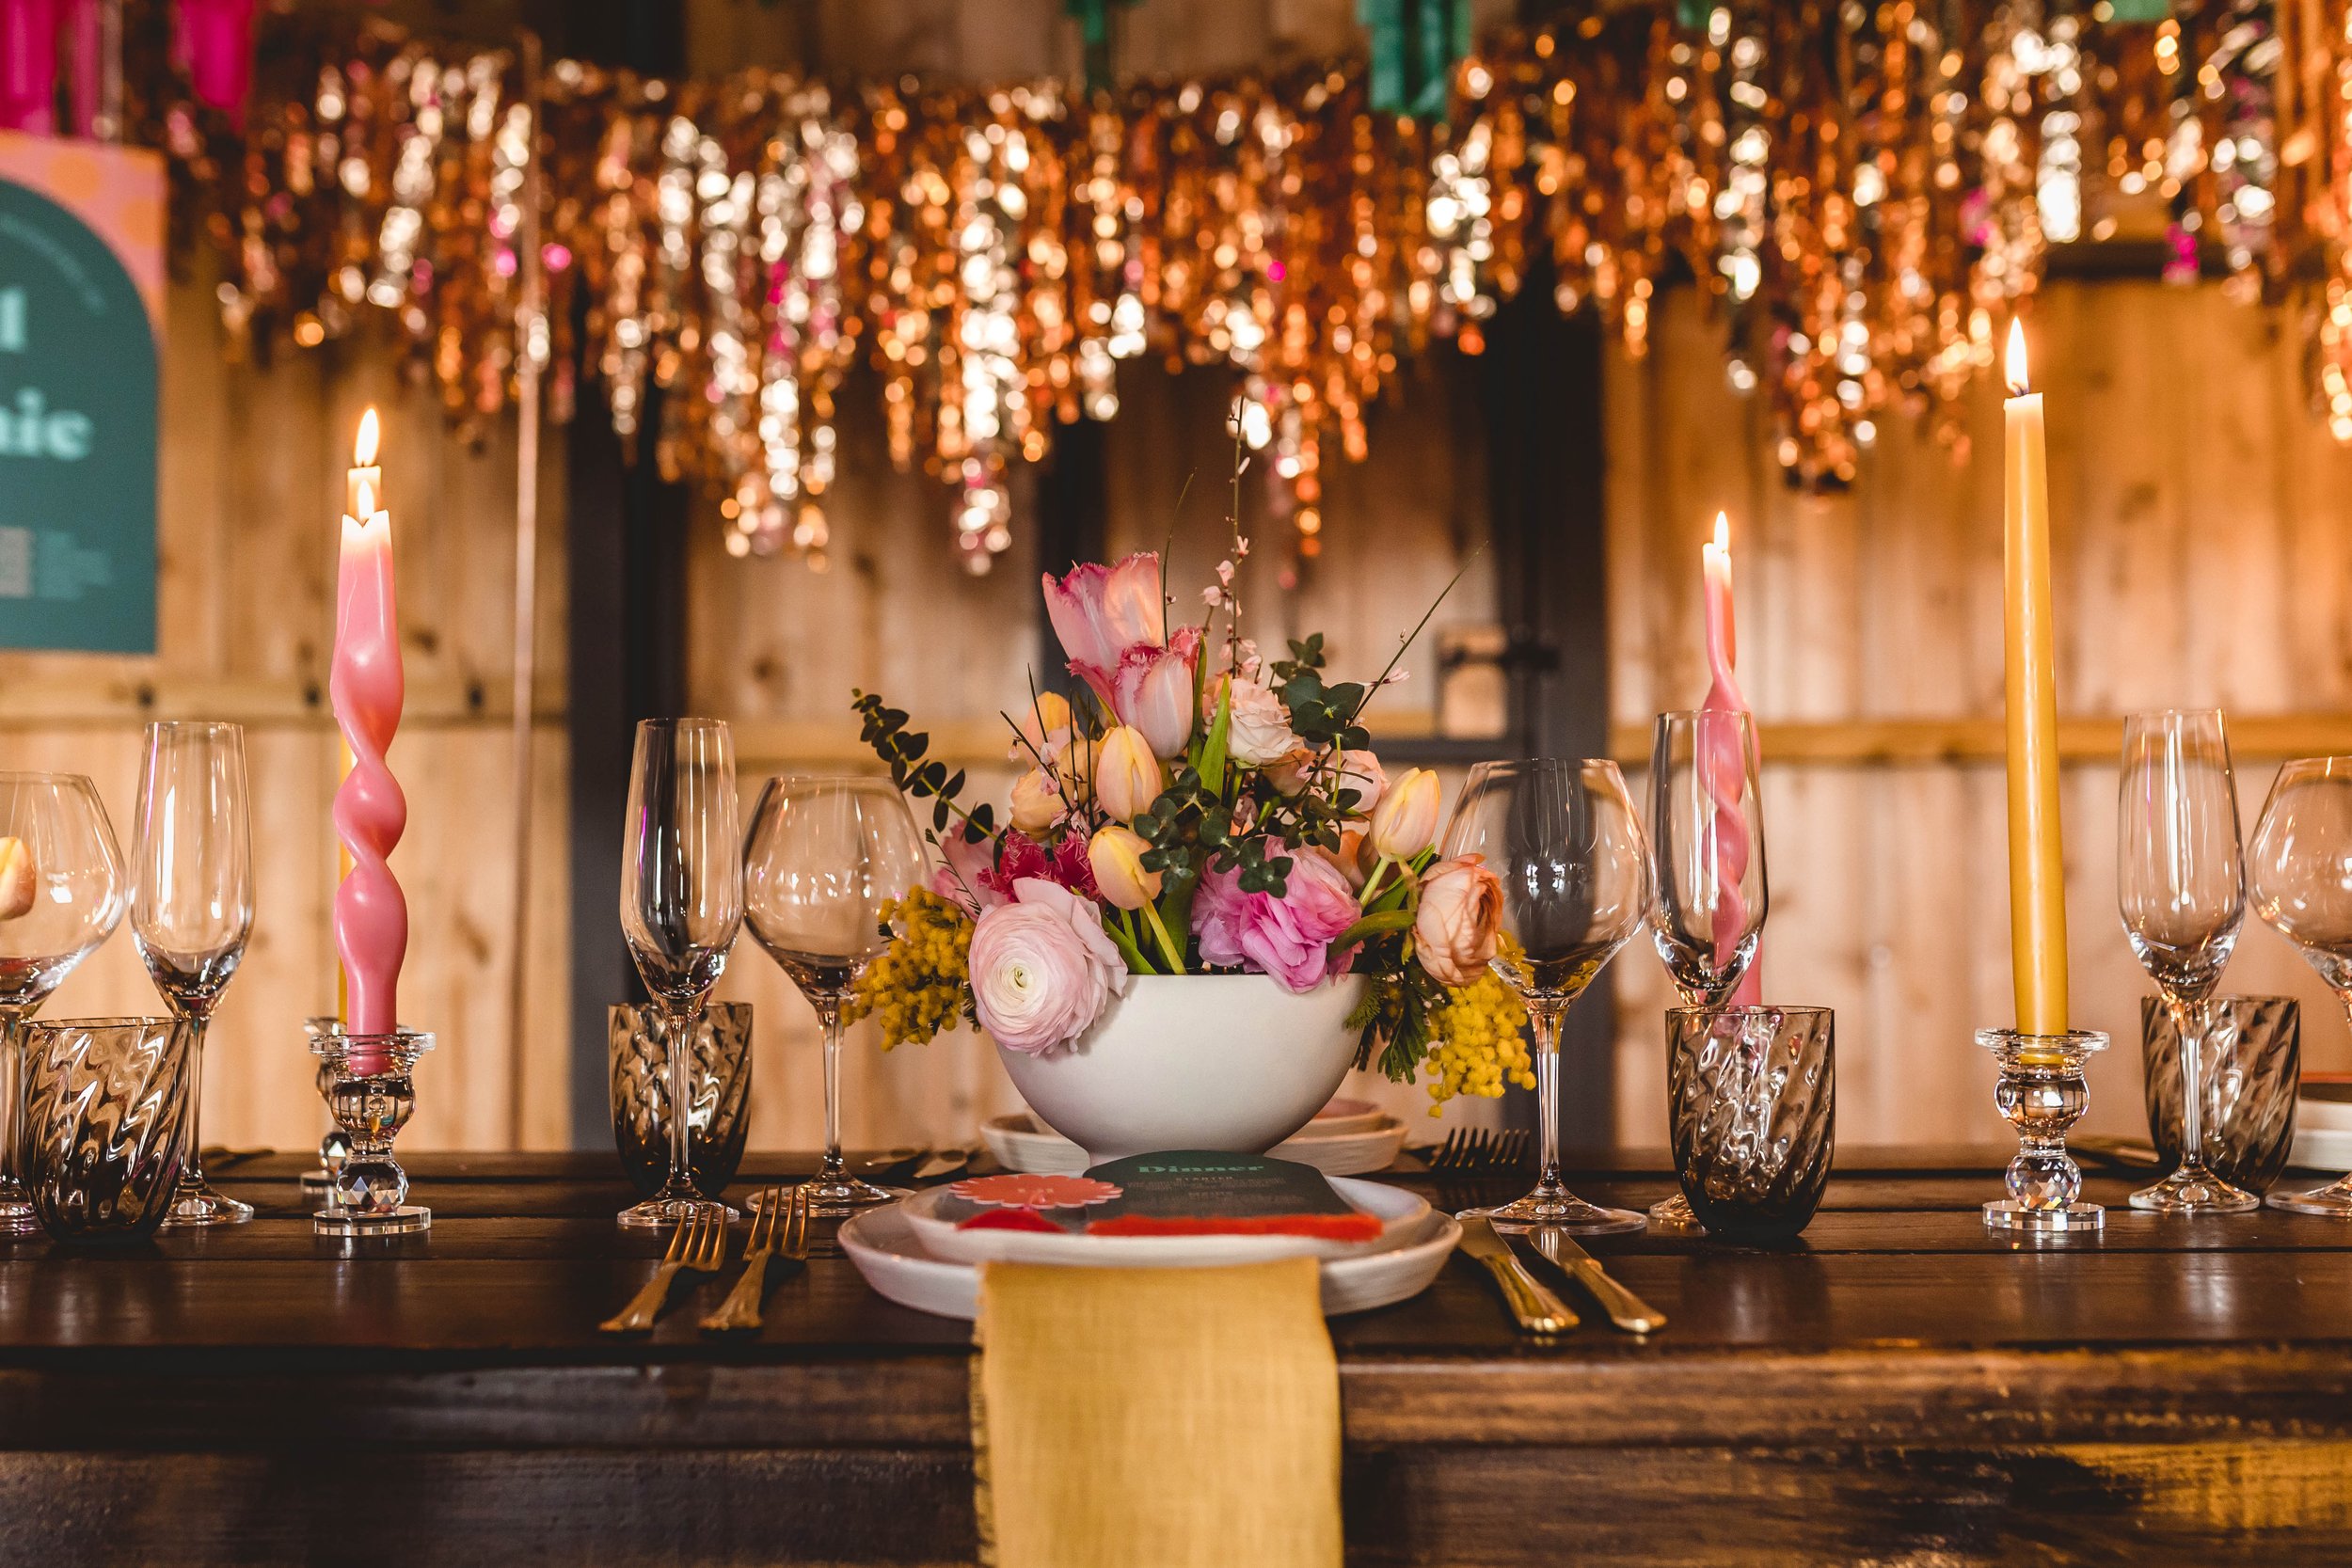  A modern display of bright, wild flowers are displayed in a white bowl in the centre of the wedding table. The softness of the pink and yellow florals contrasts against the bare wooden walls of the room and the gold streamers.  Photo by: Carmel Tere